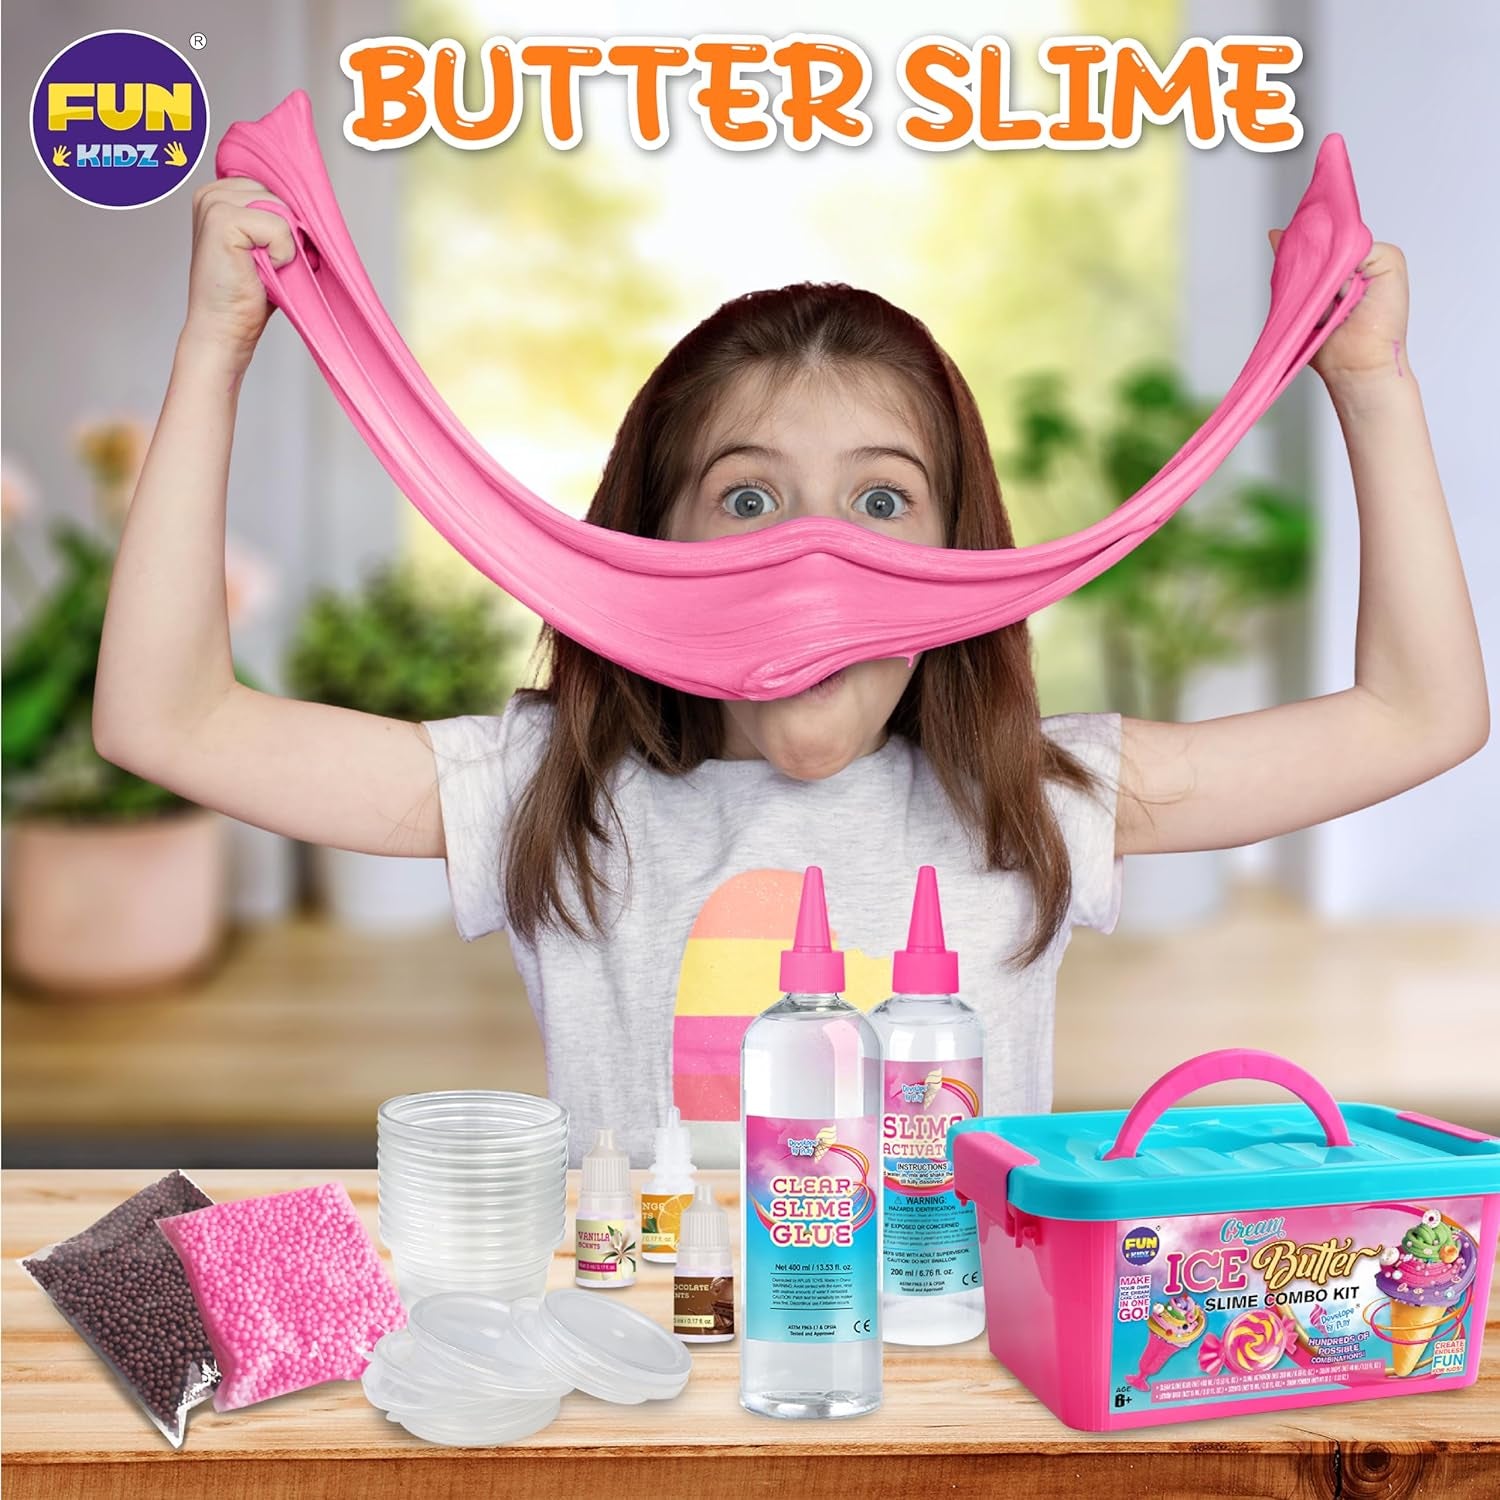 Gift Butter Slime Kit for Girls 10-12, Funkidz Ice Cream Soft Slime Making Kit Ages 8-12 Kids Slime Toys Ideal Birthday Party Present